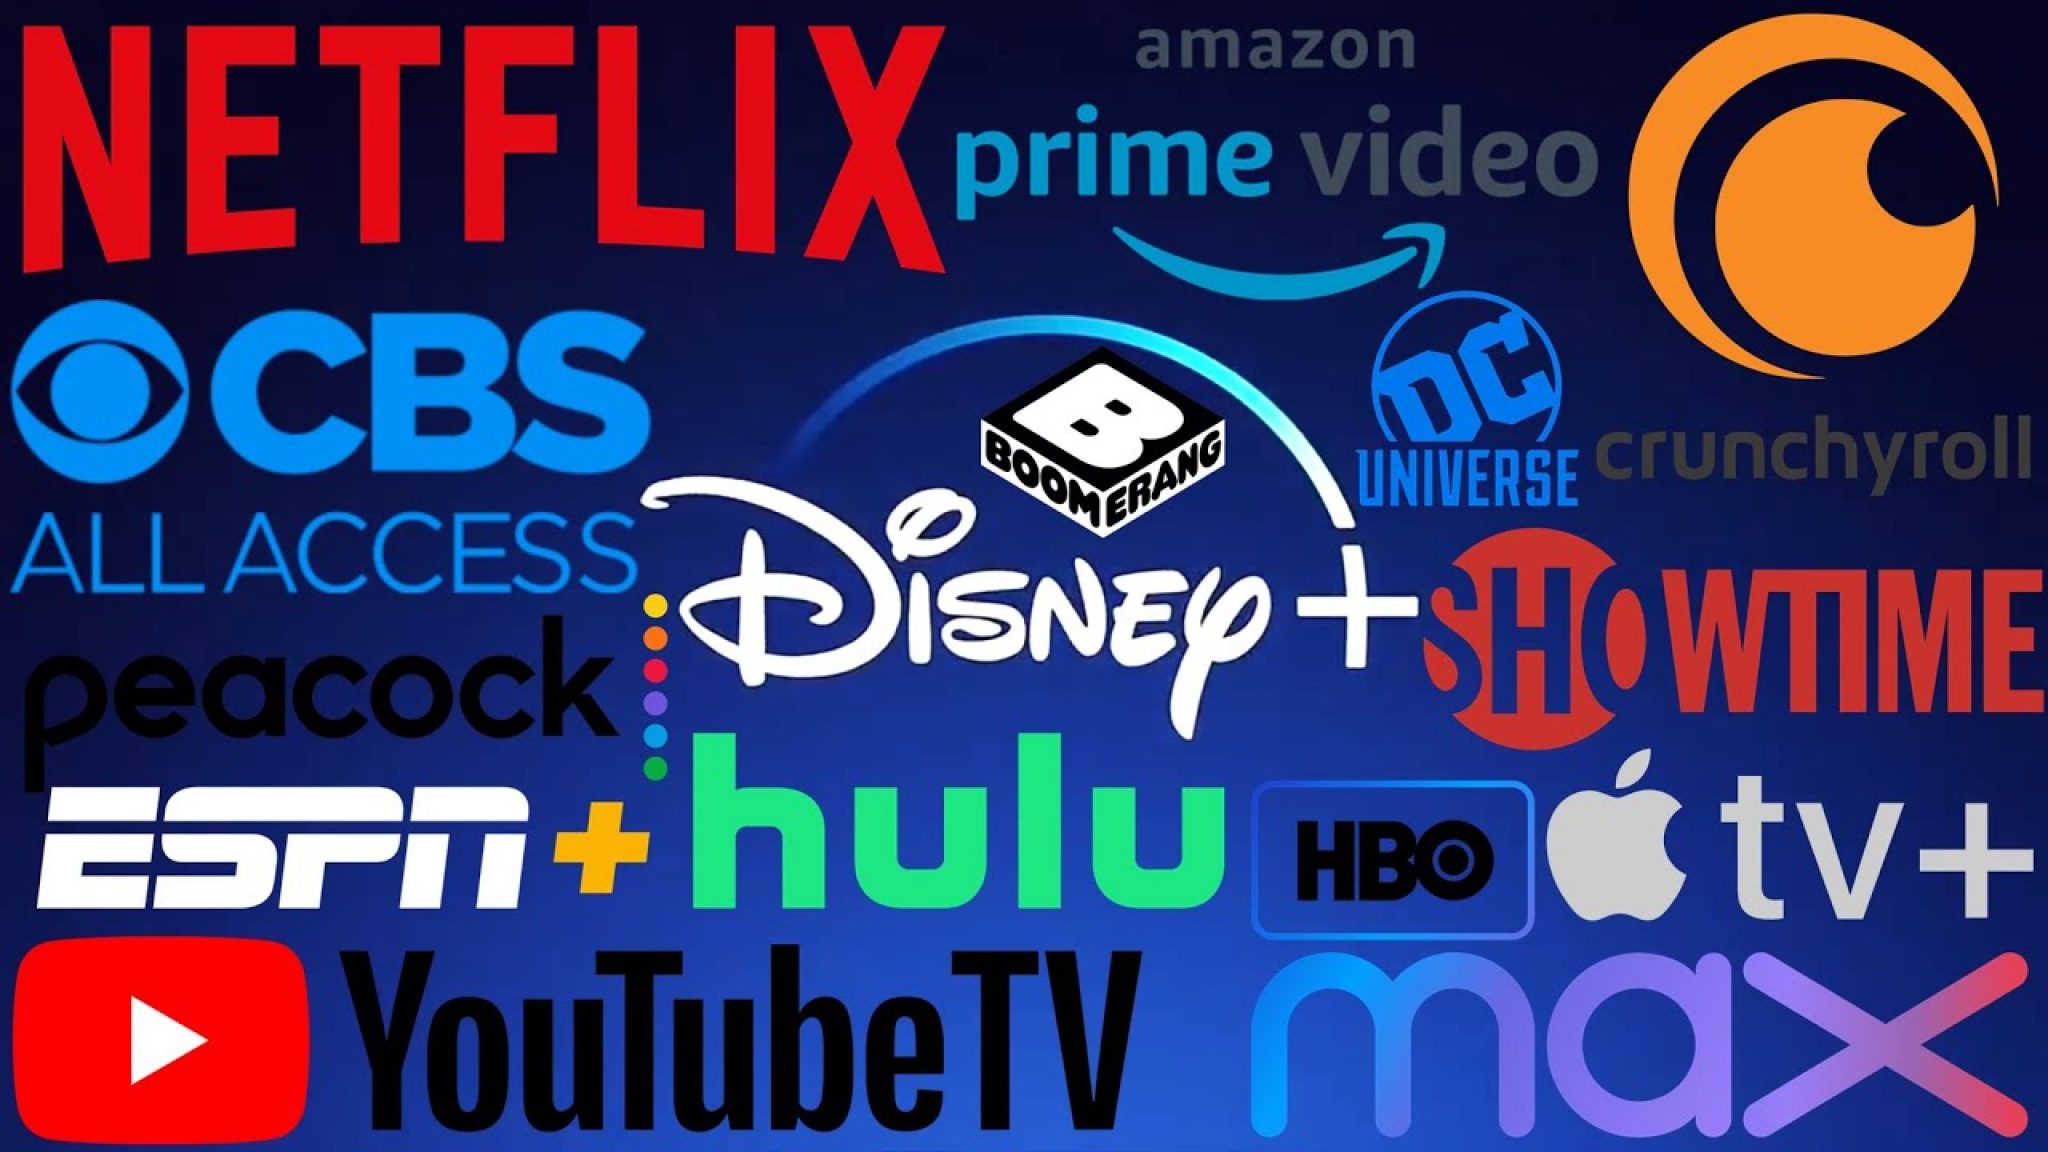 From Netflix to Disney Plus to HBO What to Expect from Streaming